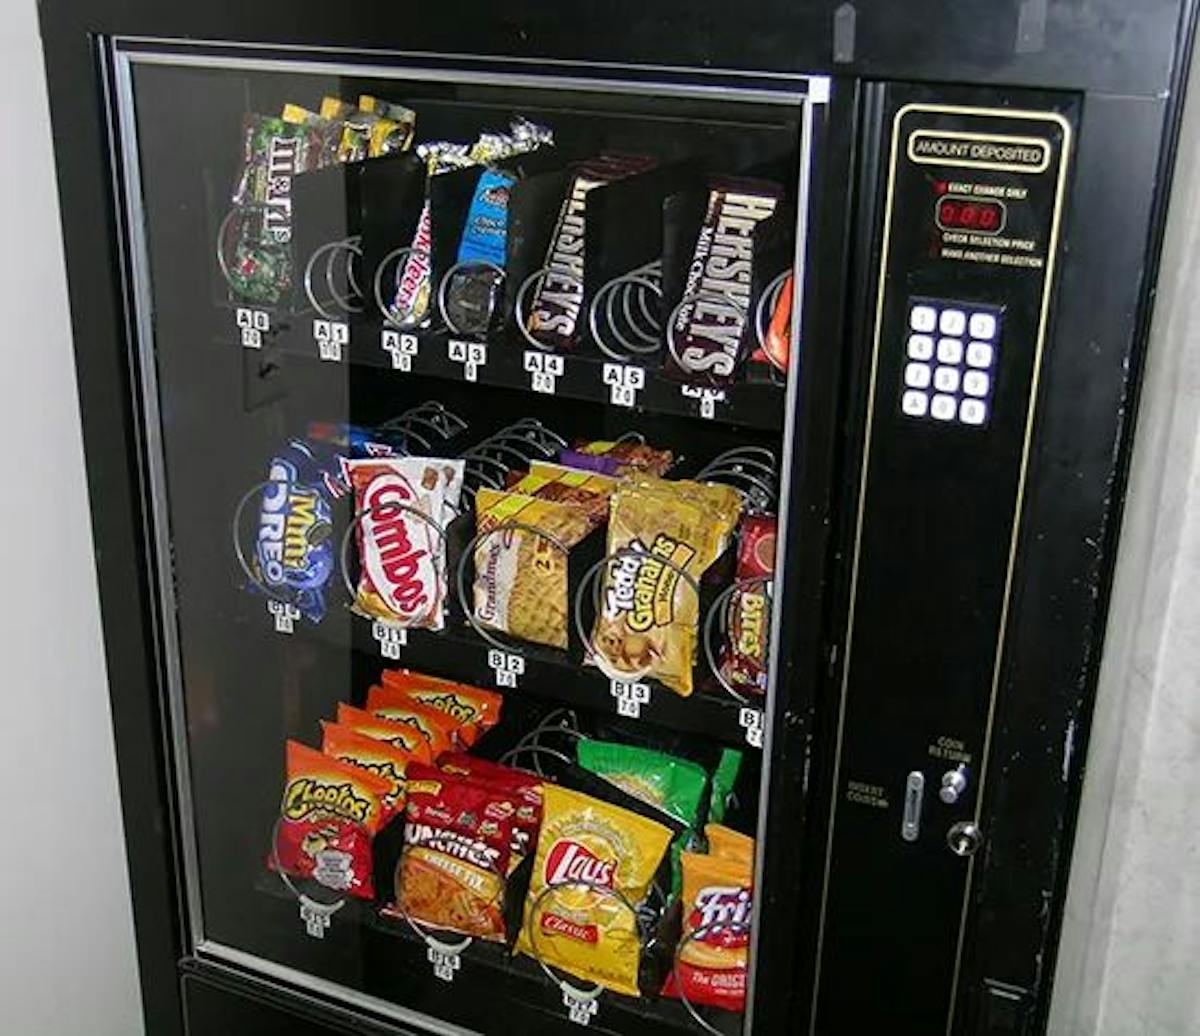 Familiar with vending machines?